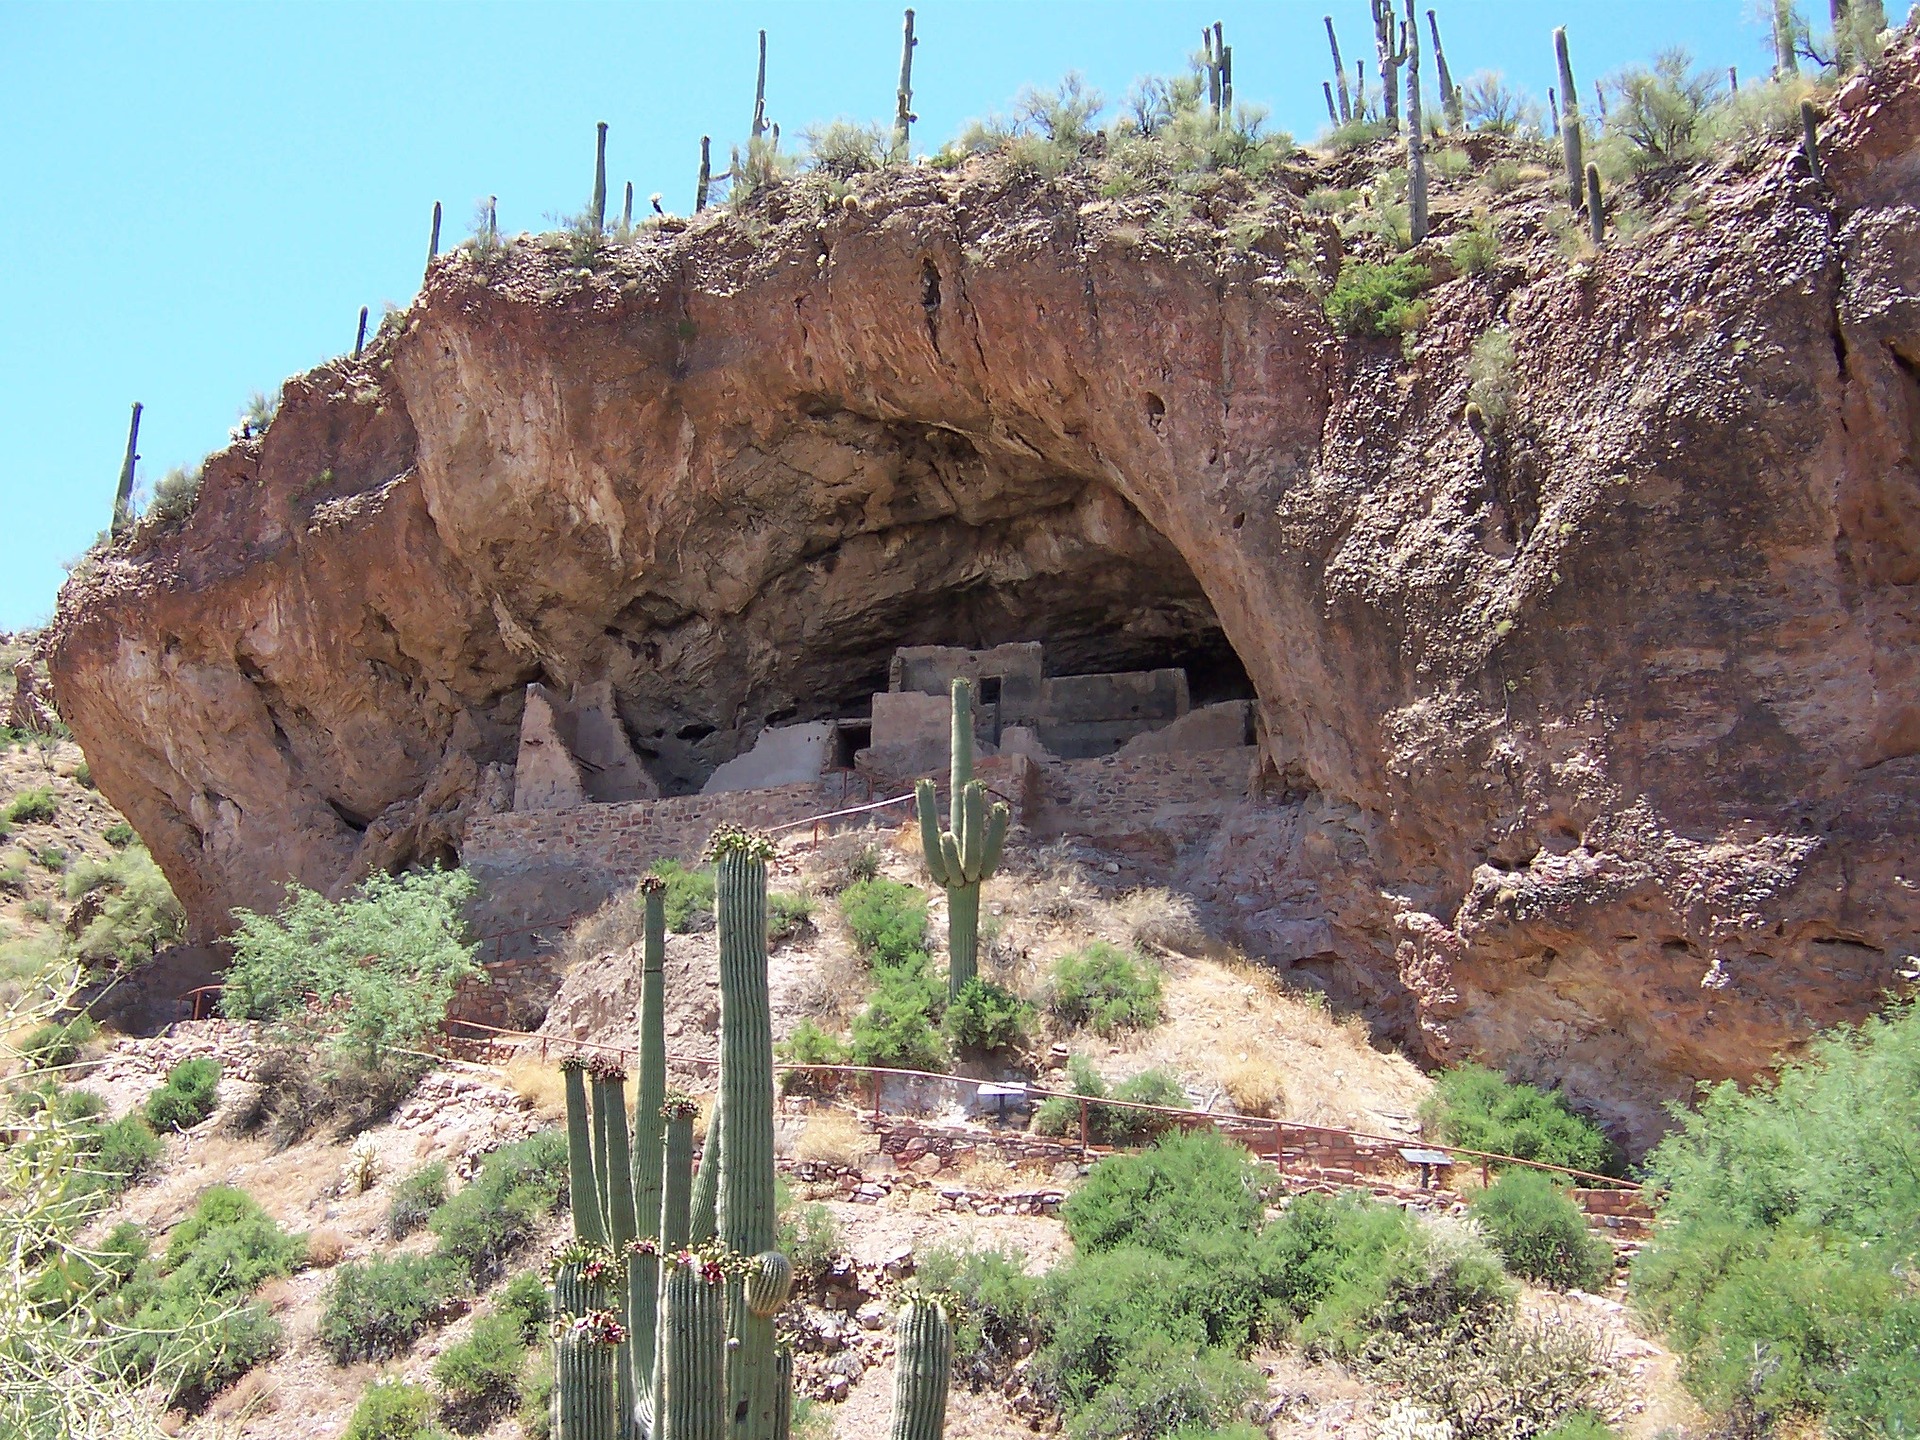 The Tonto National Monument is a National Monument in the Superstition Mountains, in the Gila County of central Arizona, and a unique place to visit.